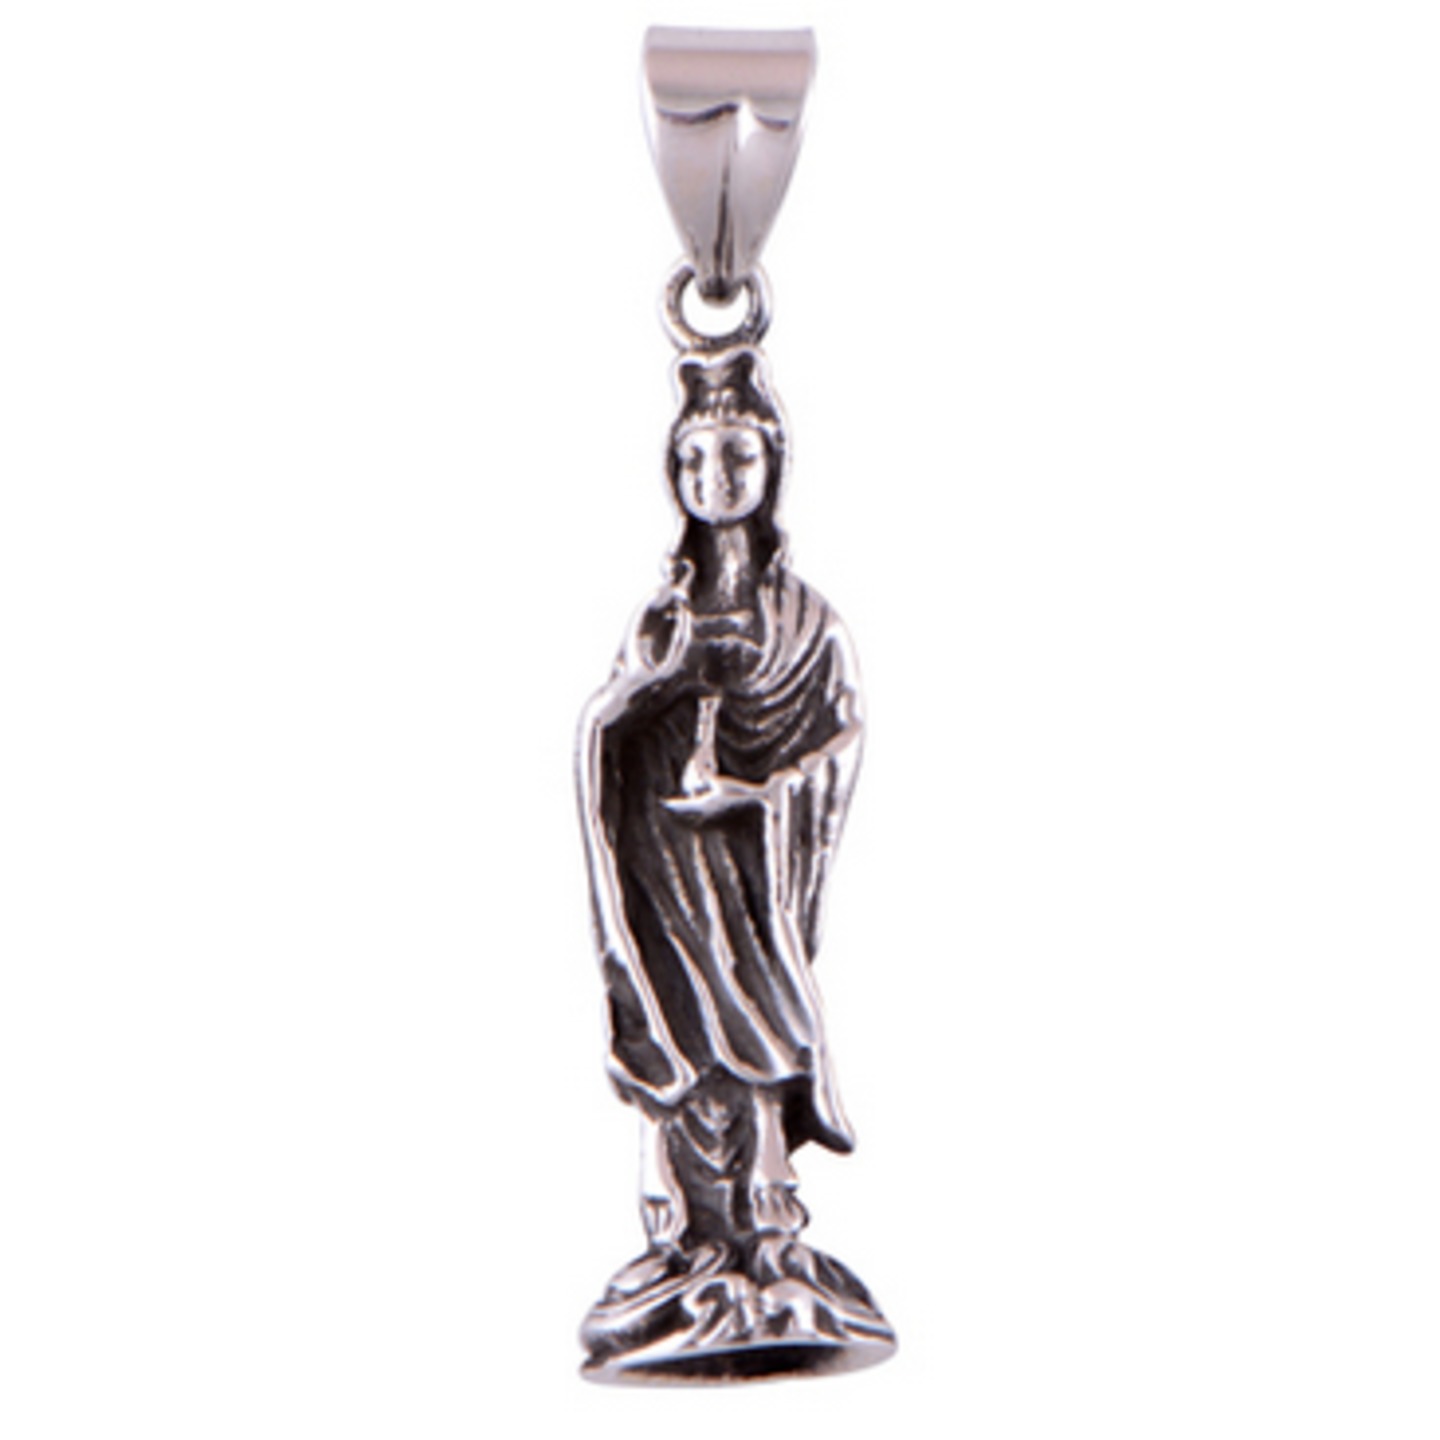 The Mother Mary Silver Pendant